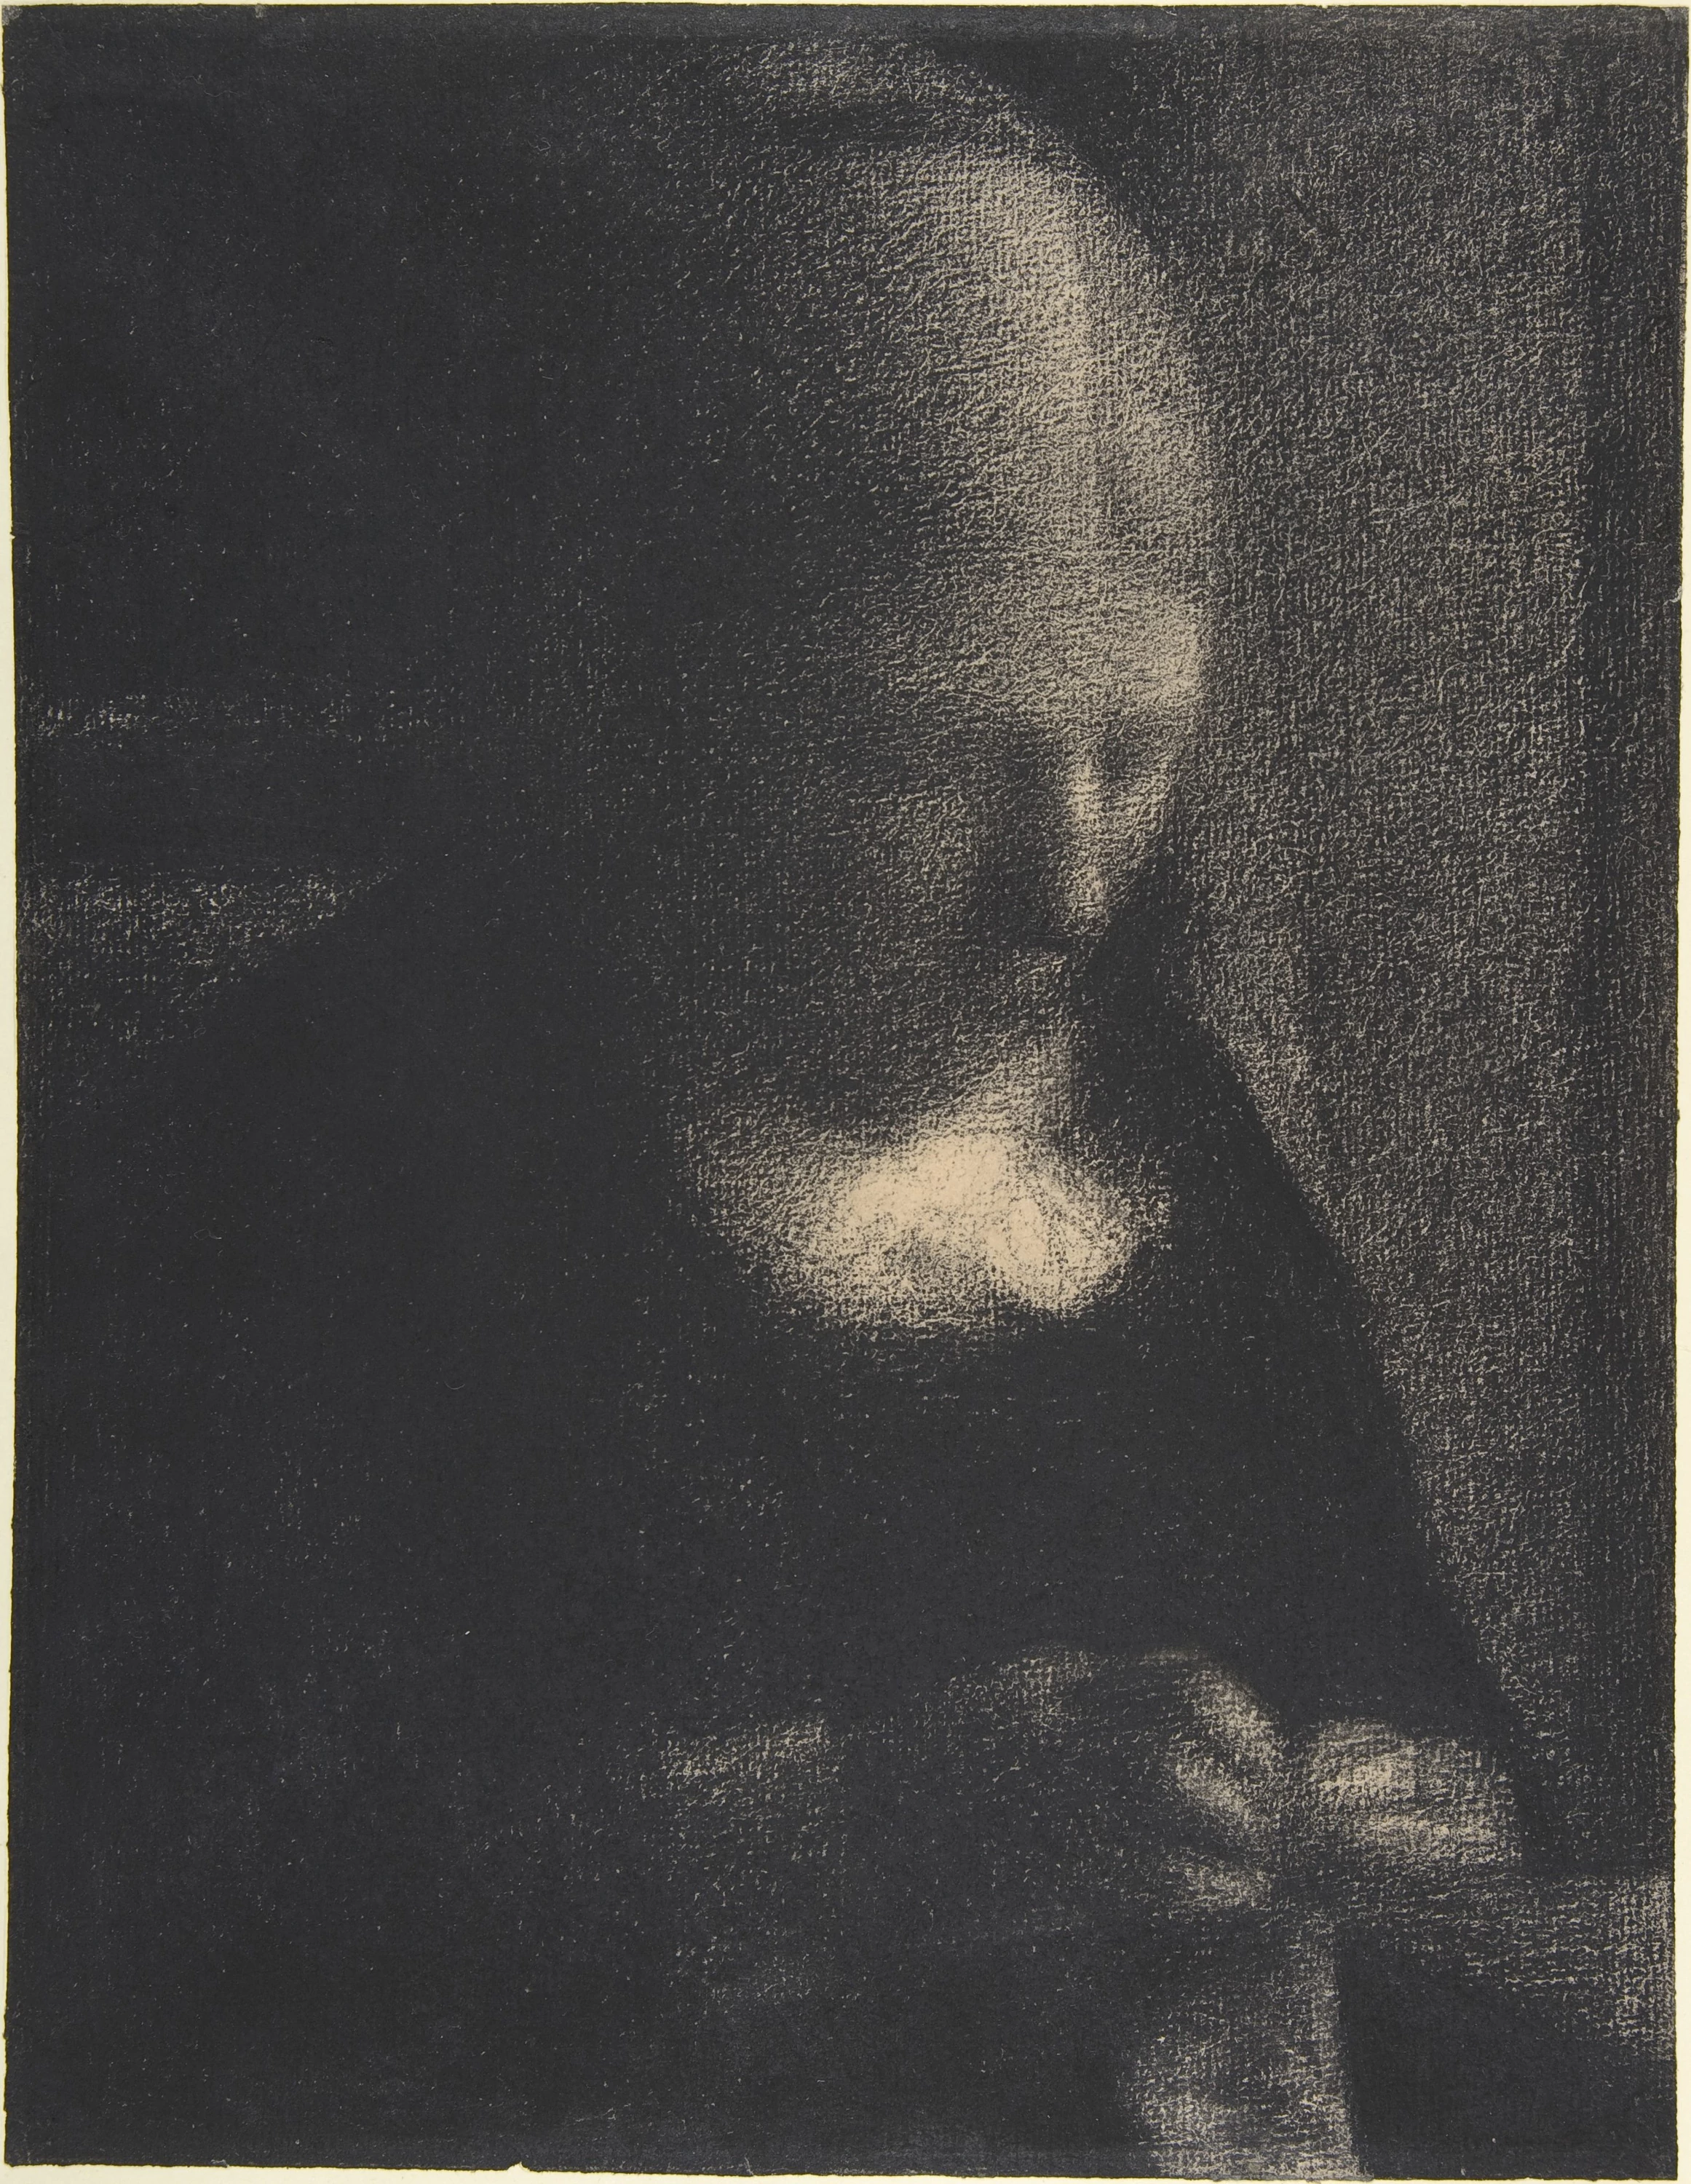 Embroidery; The Artist's Mother, Georges Seurat